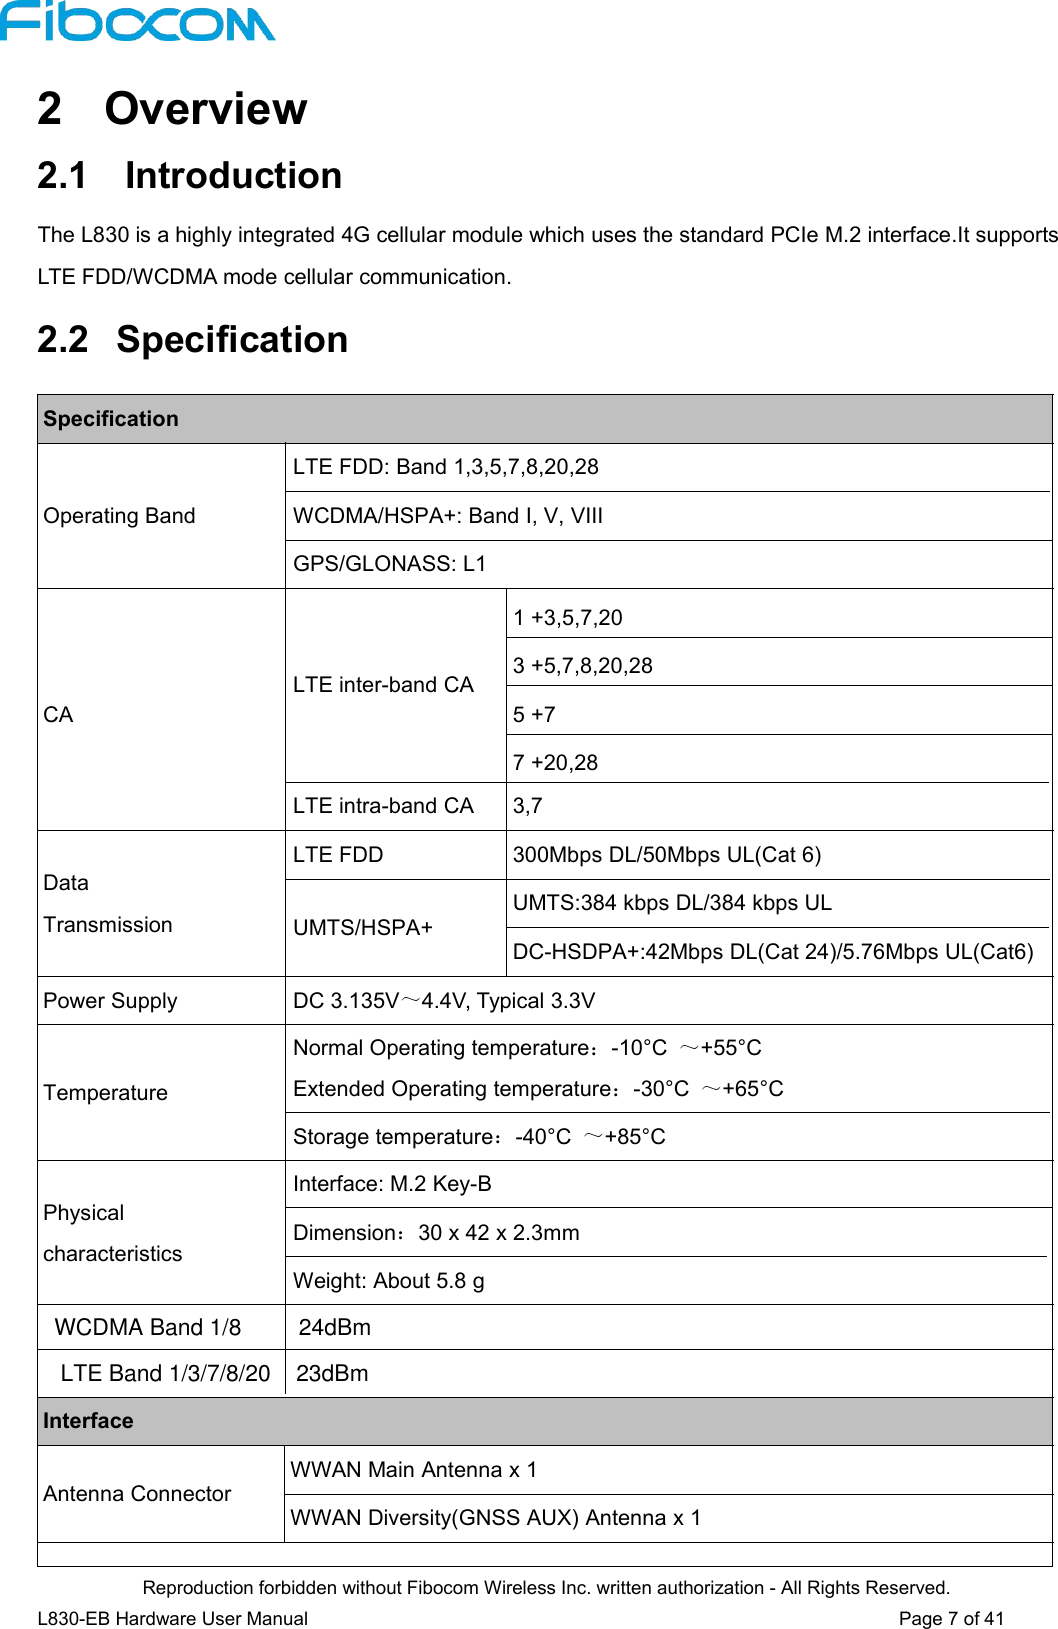 Reproduction forbidden without Fibocom Wireless Inc. written authorization - All Rights Reserved.L830-EB Hardware User Manual Page 7 of 412 Overview2.1 IntroductionThe L830 is a highly integrated 4G cellular module which uses the standard PCIe M.2 interface.It supportsLTE FDD/WCDMA mode cellular communication.2.2 SpecificationSpecificationOperating BandLTE FDD: Band 1,3,5,7,8,20,28WCDMA/HSPA+: Band I, V, VIIIGPS/GLONASS: L1CALTE inter-band CA1 +3,5,7,203 +5,7,8,20,285 +77 +20,28LTE intra-band CA 3,7DataTransmissionLTE FDD 300Mbps DL/50Mbps UL(Cat 6)UMTS/HSPA+UMTS:384 kbps DL/384 kbps ULDC-HSDPA+:42Mbps DL(Cat 24)/5.76Mbps UL(Cat6)Power Supply DC 3.135V～4.4V, Typical 3.3VTemperatureNormal Operating temperature：-10°C ～+55°CExtended Operating temperature：-30°C ～+65°CStorage temperature：-40°C ～+85°CPhysicalcharacteristicsInterface: M.2 Key-BDimension：30 x 42 x 2.3mmWeight: About 5.8 gInterfaceAntenna ConnectorWWAN Main Antenna x 1WWAN Diversity(GNSS AUX) Antenna x 1WCDMA Band 1/8         24dBmLTE Band 1/3/7/8/20    23dBm